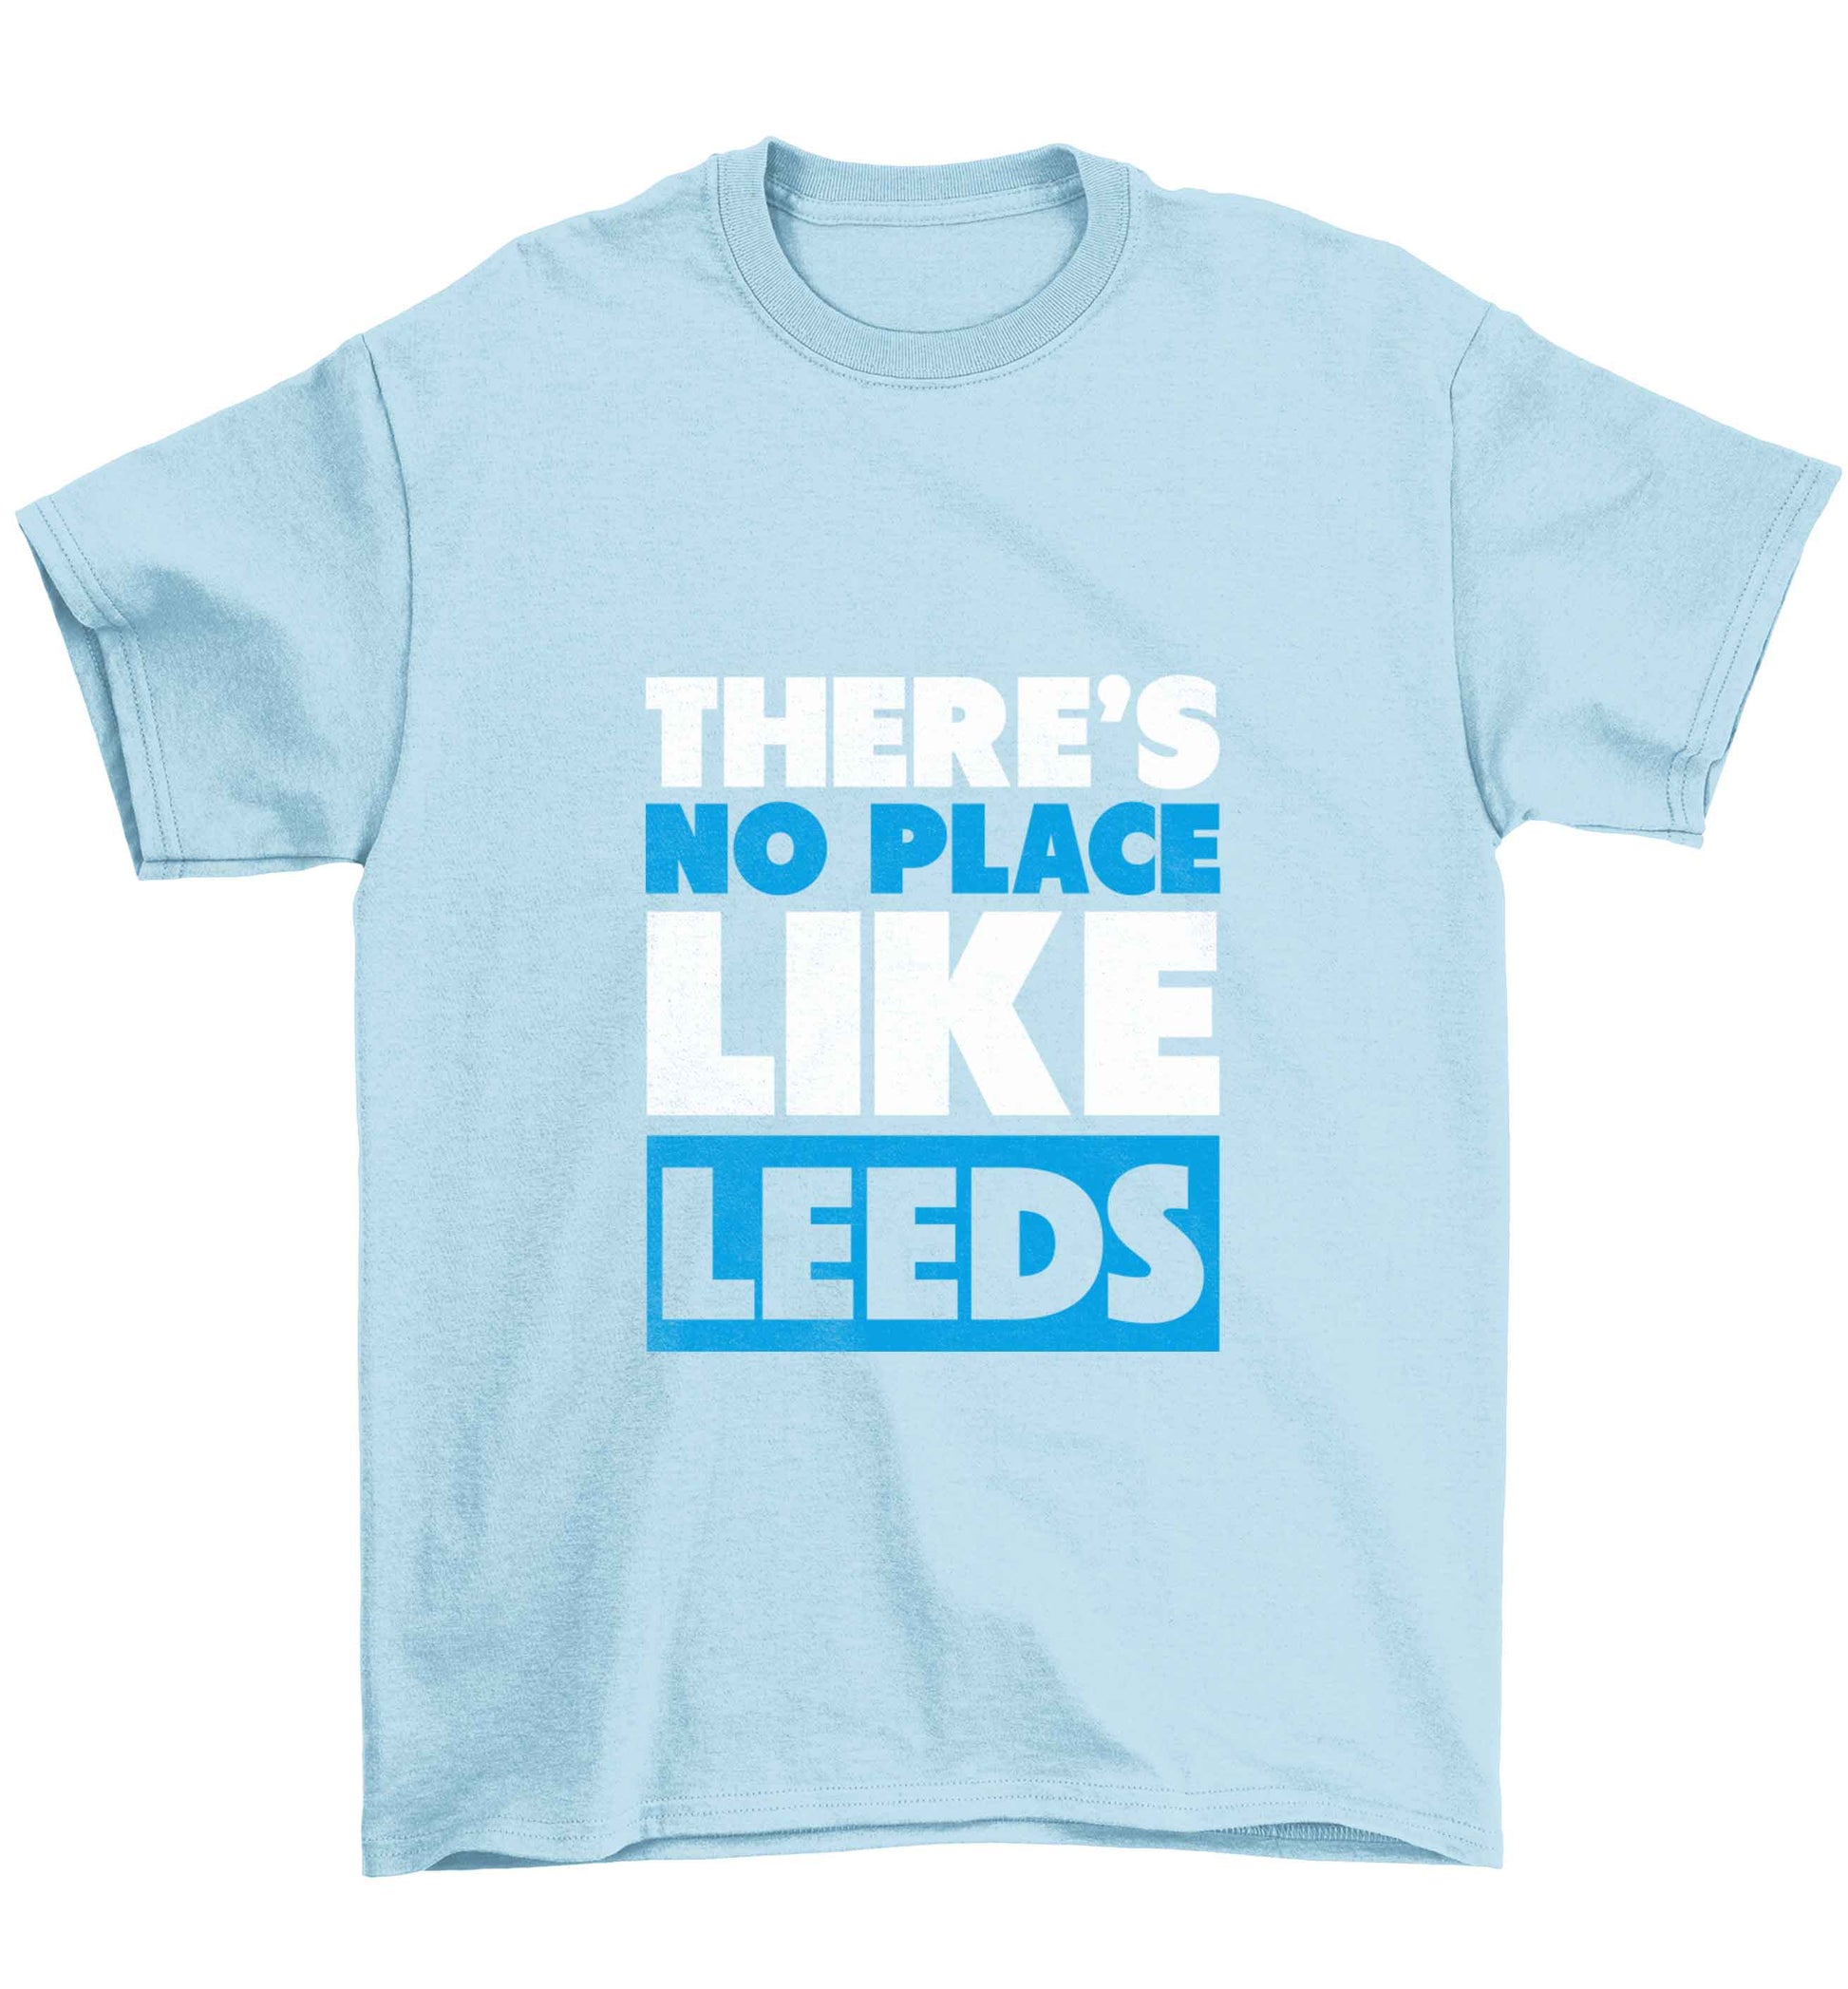 There's no place like Leeds Children's light blue Tshirt 12-13 Years